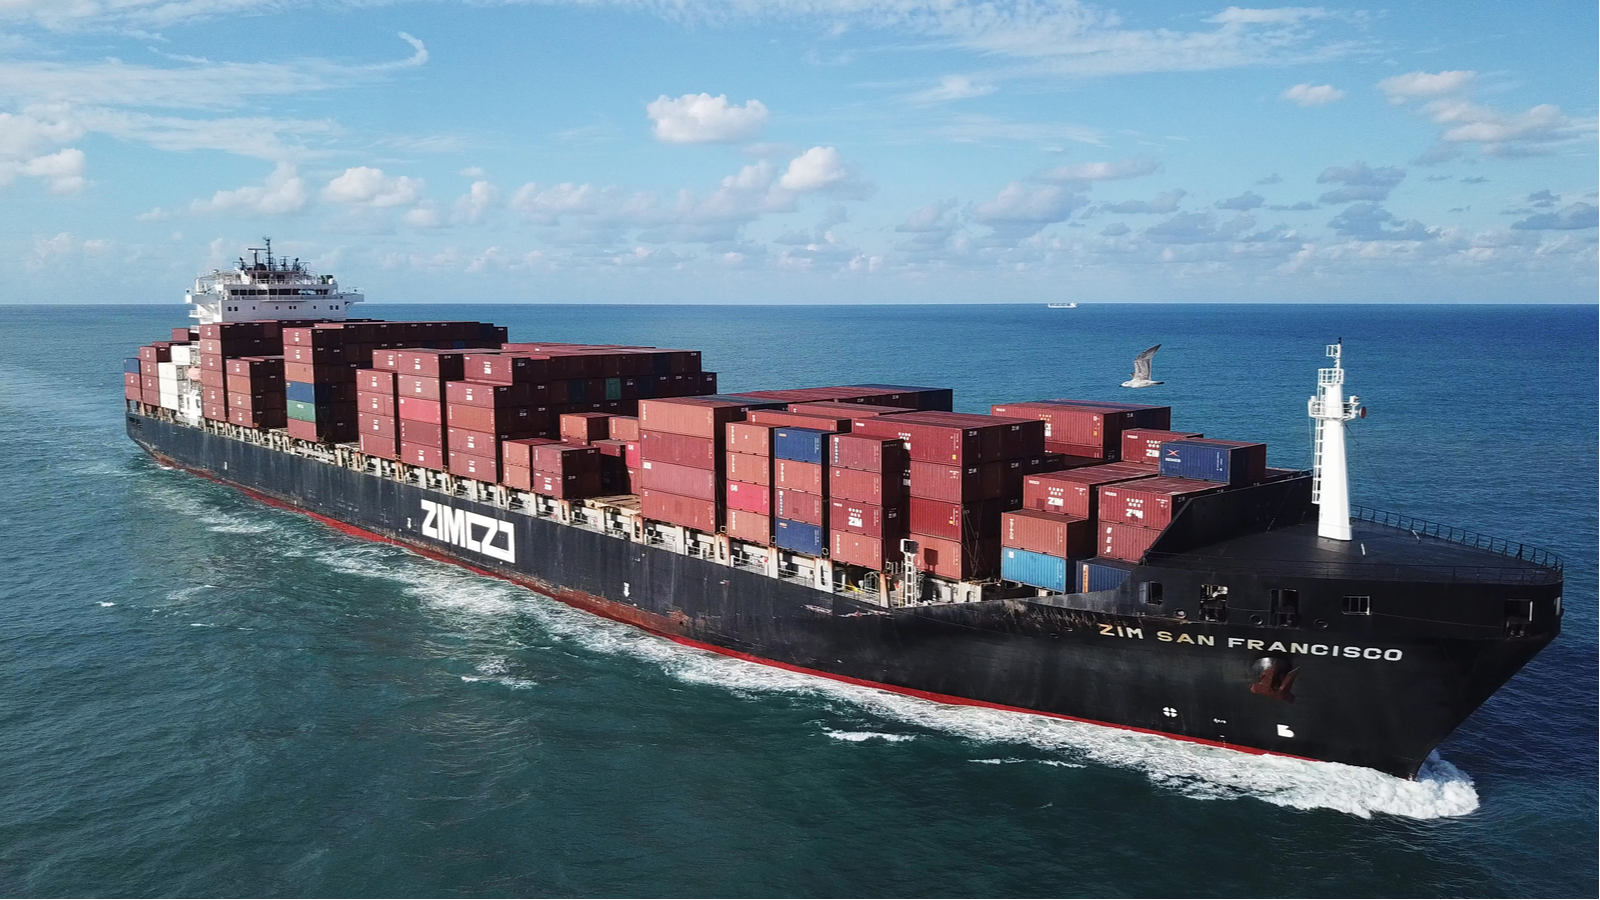 A large ULCV container ship underway, sails the open water fully loaded with containers and cargo - the ZIM San Francisco, representing zim stock.